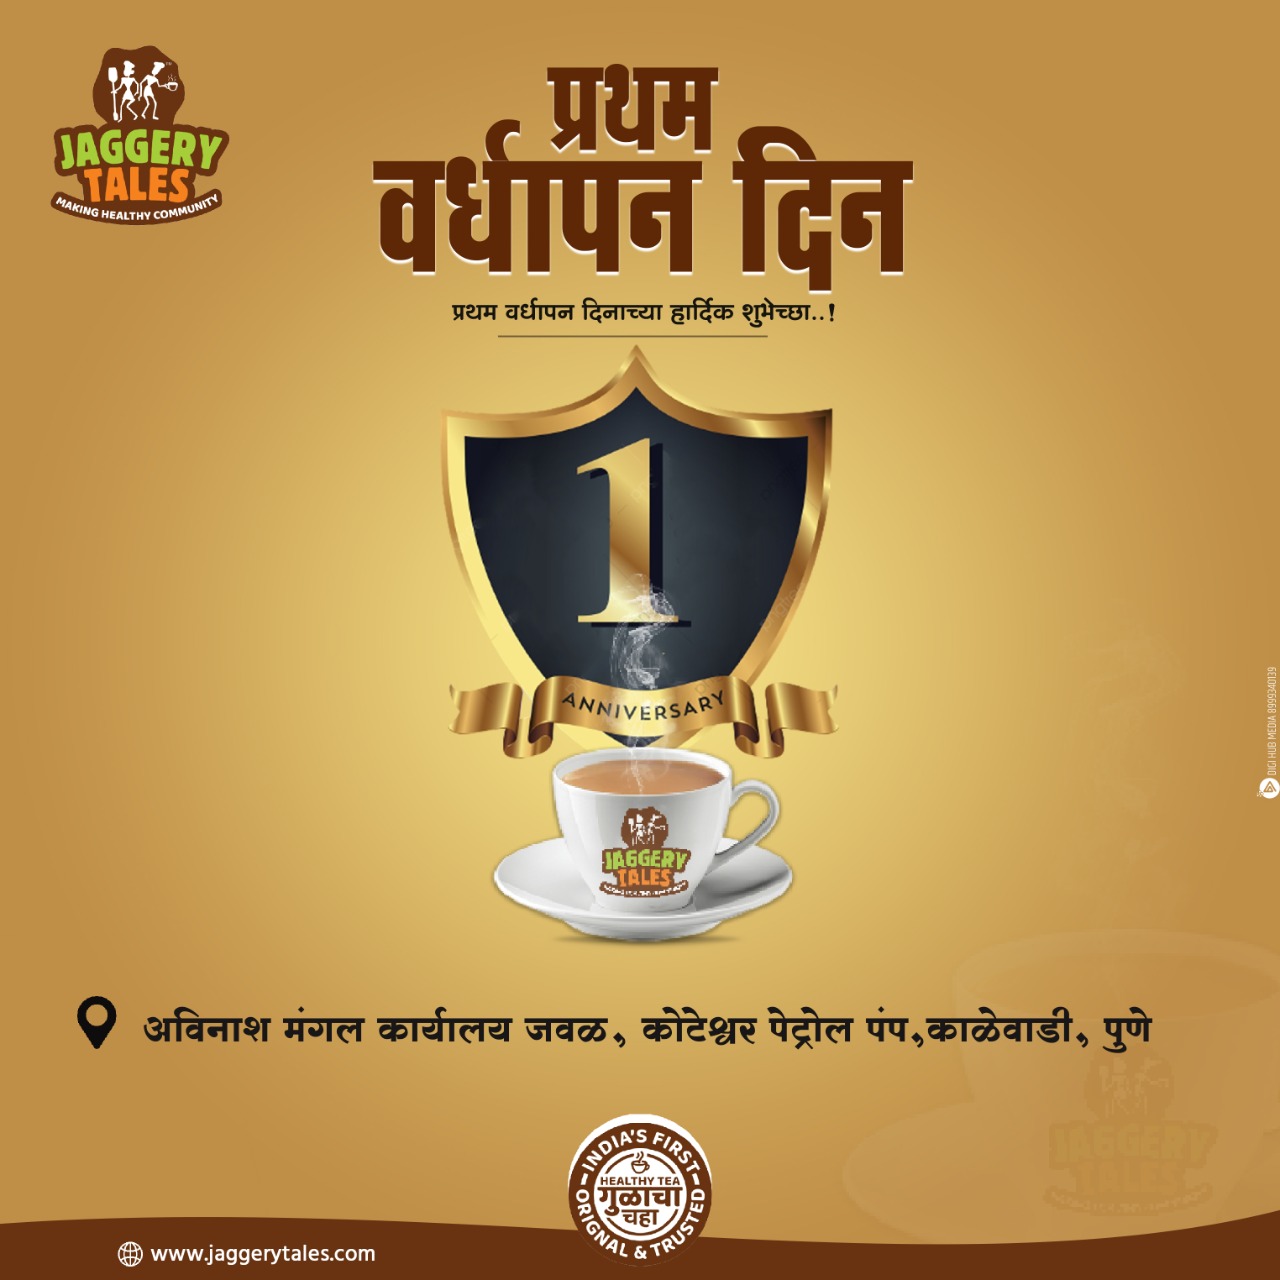 First Anniversary  Outlet of Jaggery tea franchise.